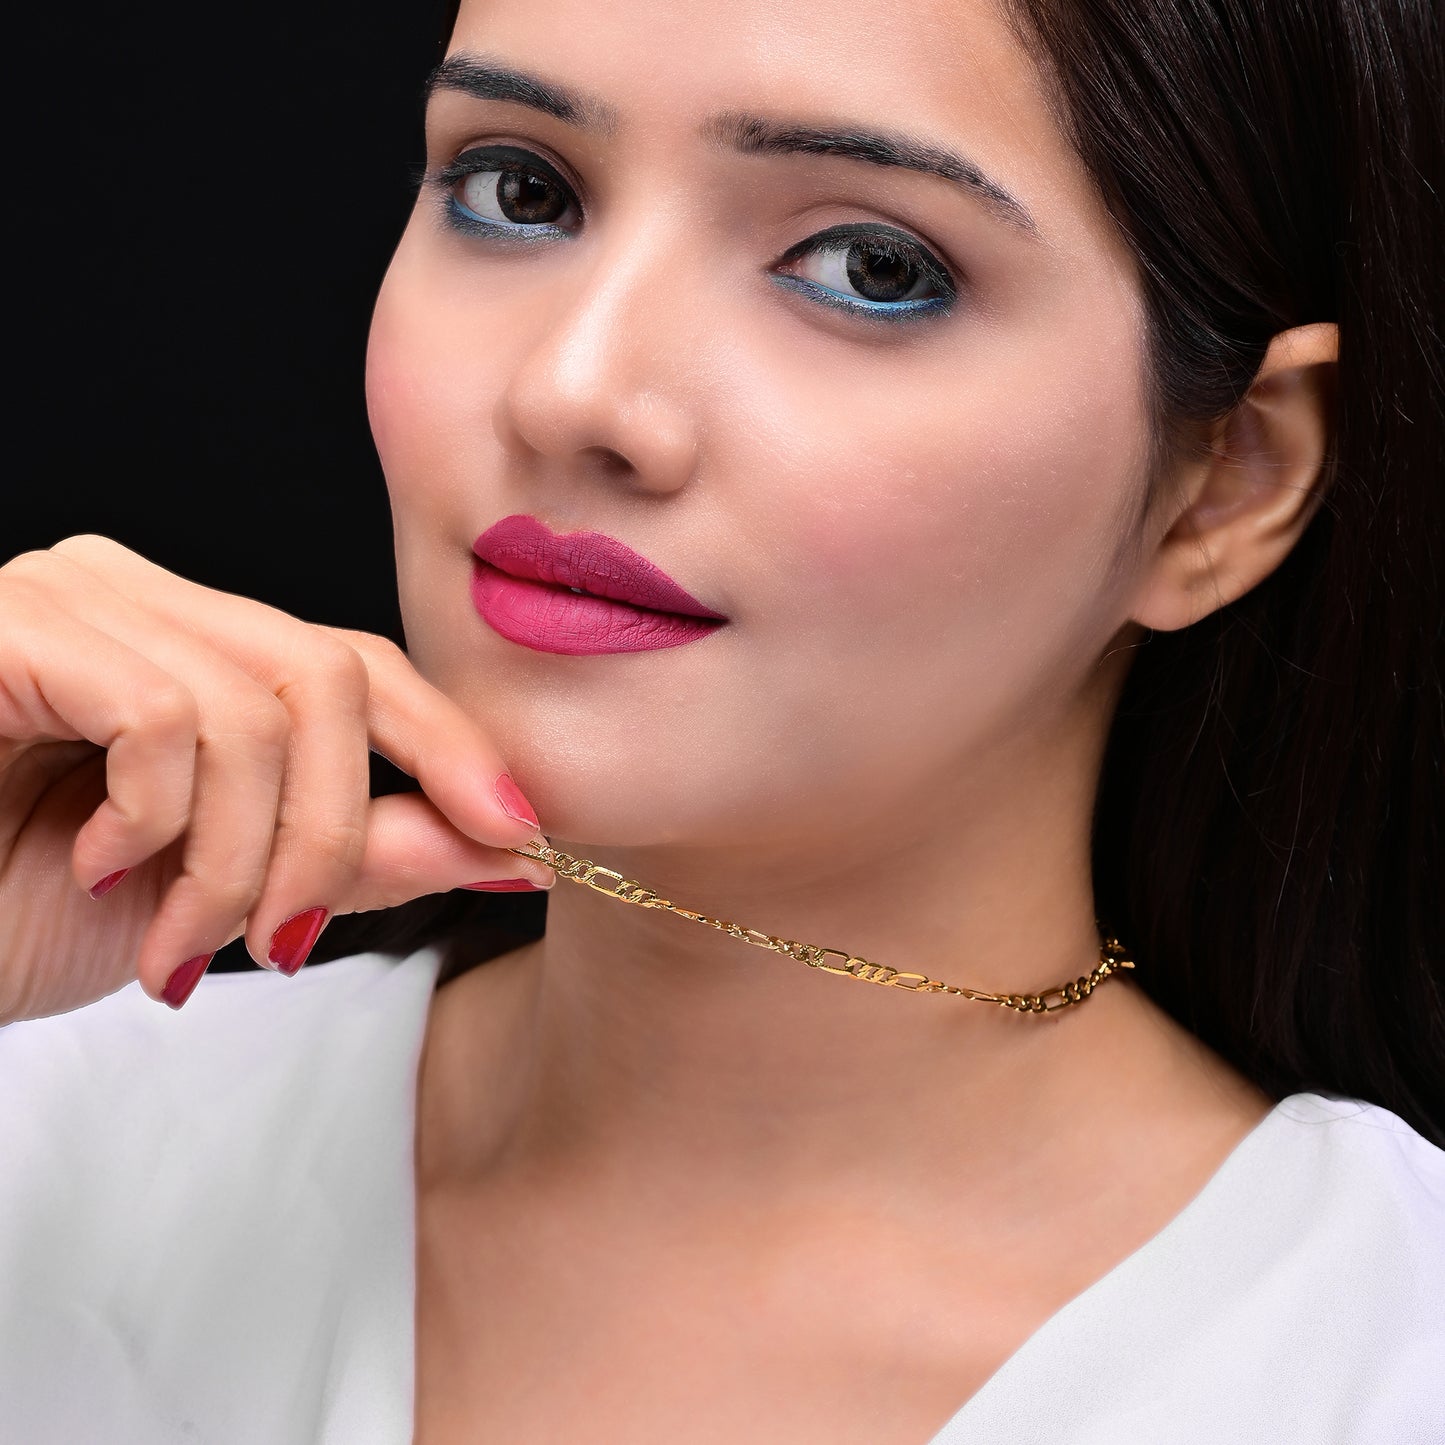 Stylish Gold Chain For Women And Men